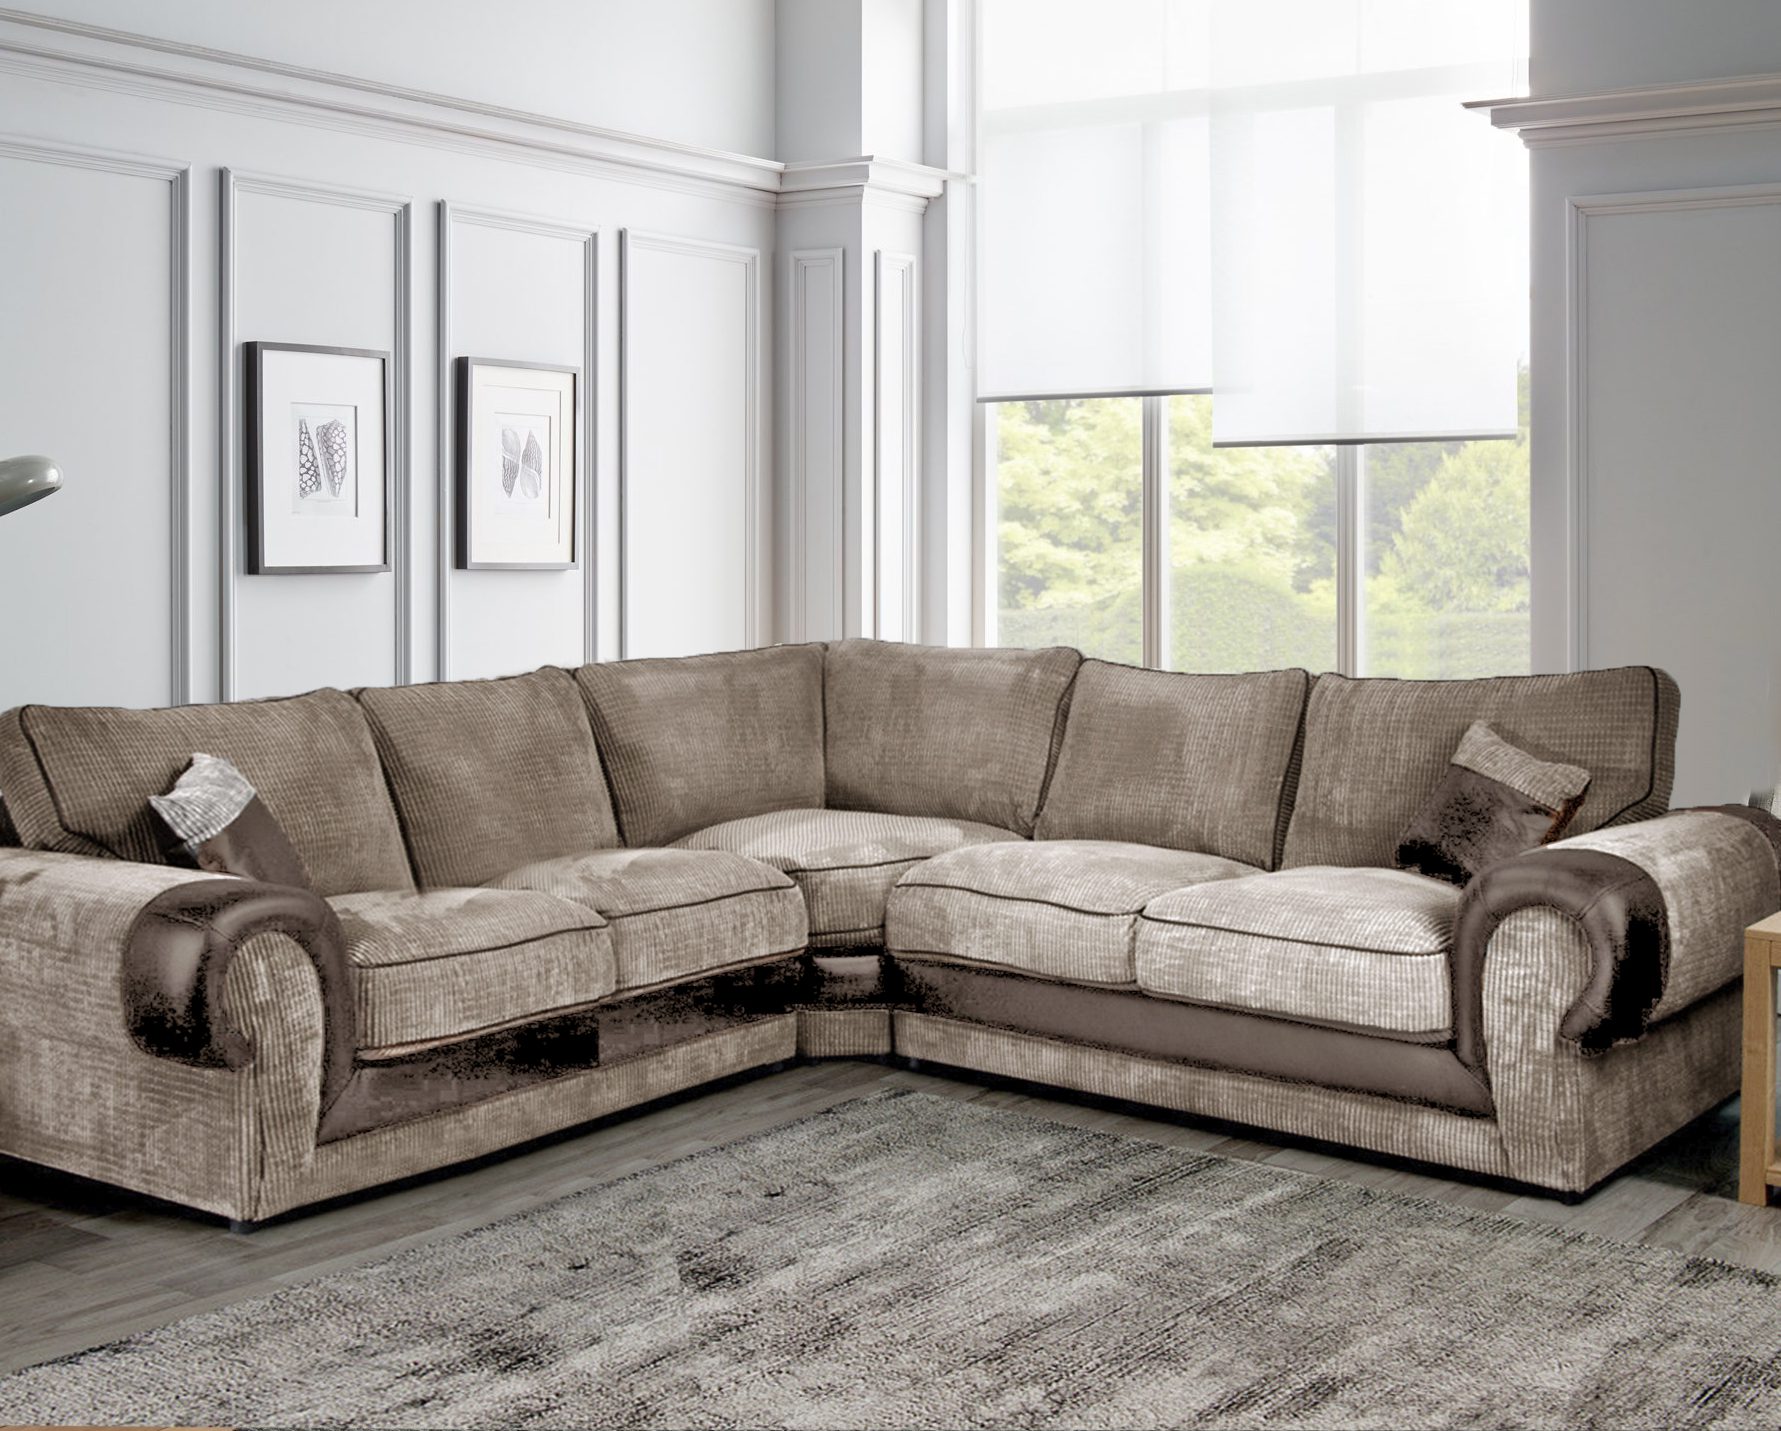 Indulge in Luxury: Finding the Best Leather Sofas in Sydney